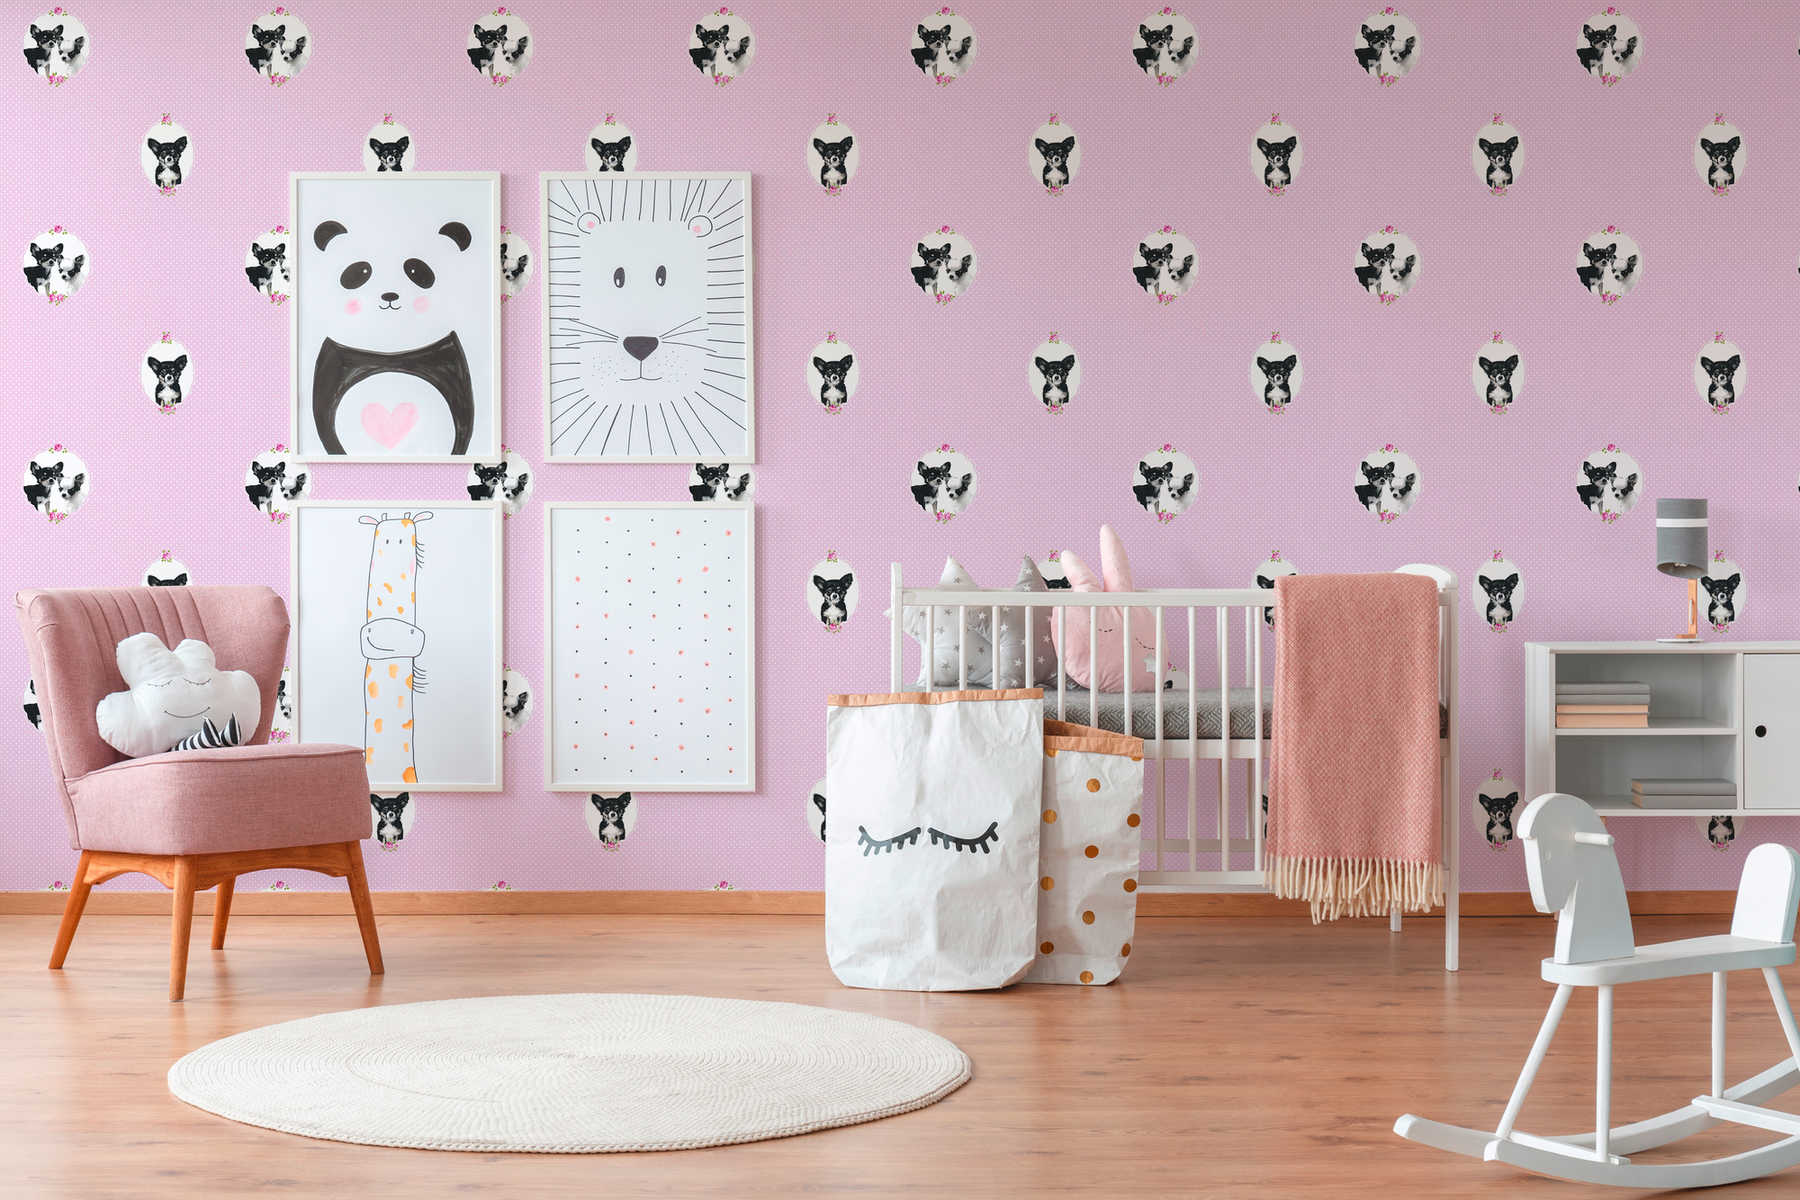             Pink dots wallpaper with dogs portraits - Pink
        